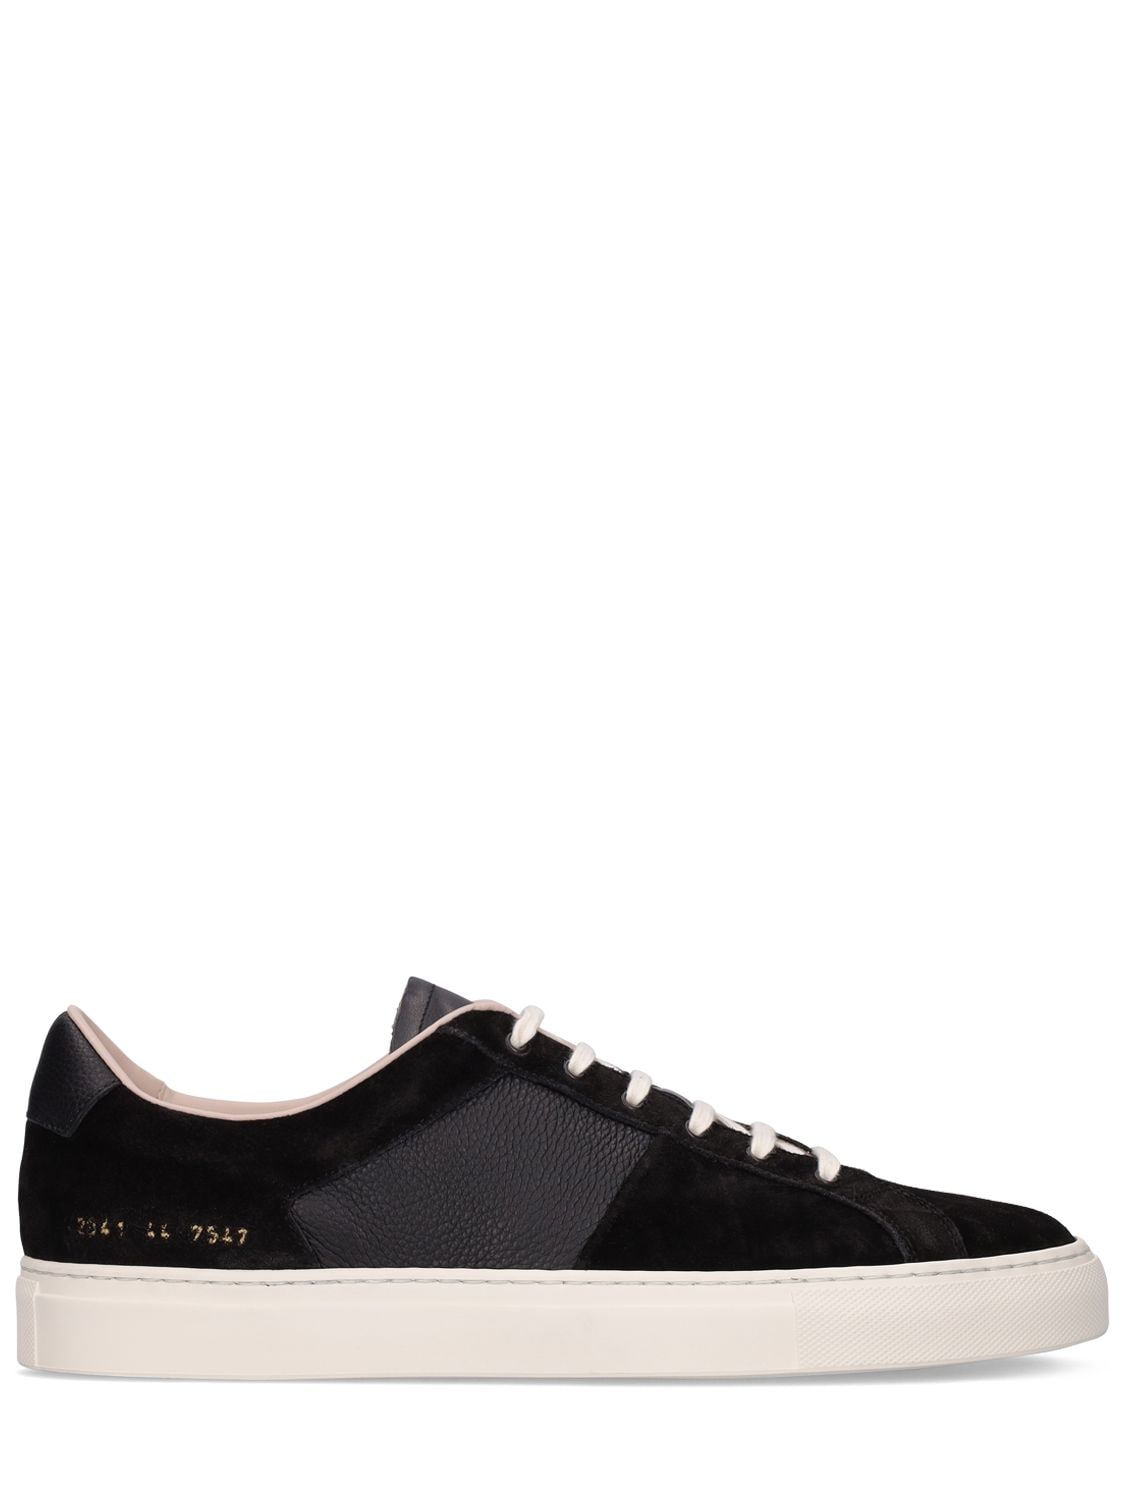 COMMON PROJECTS Winter Achilles Suede Sneakers